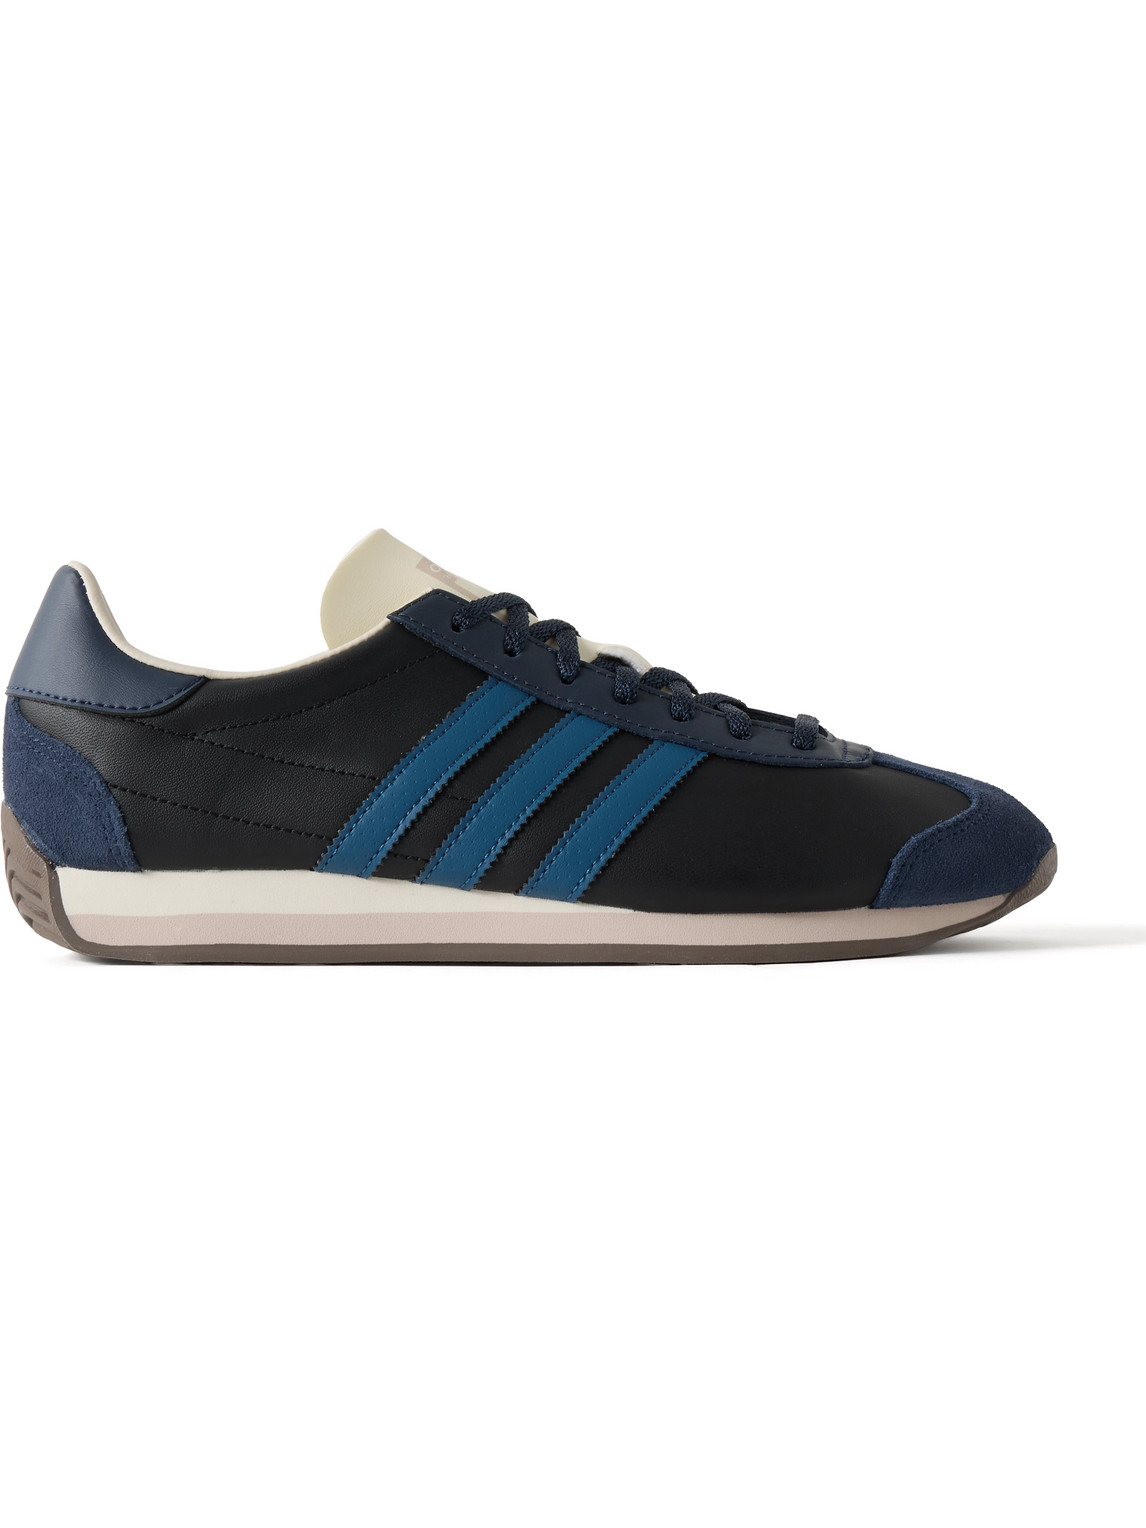 Adidas Originals Country Suede-trimmed Leather Sneakers In Black